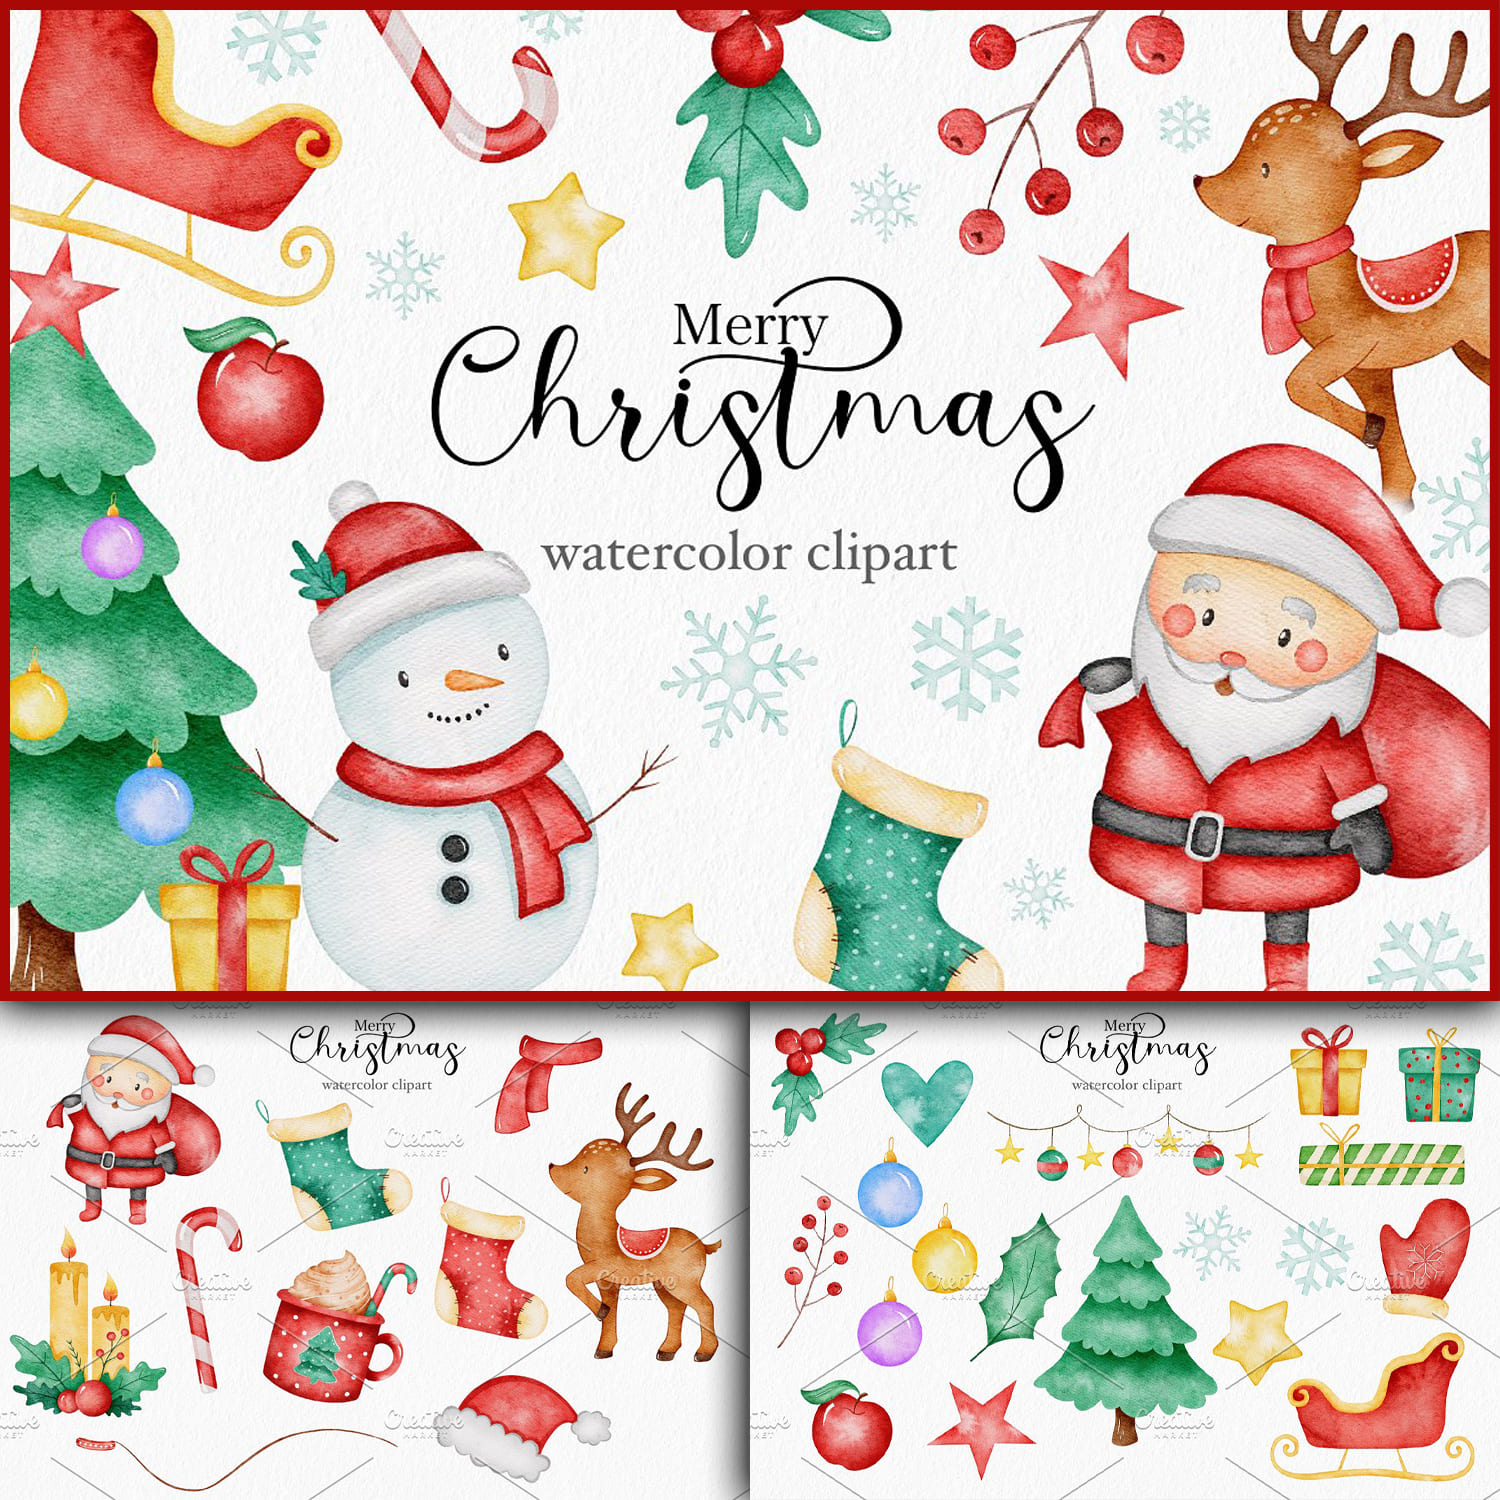 Merry Christmas watercolor clipart cover.